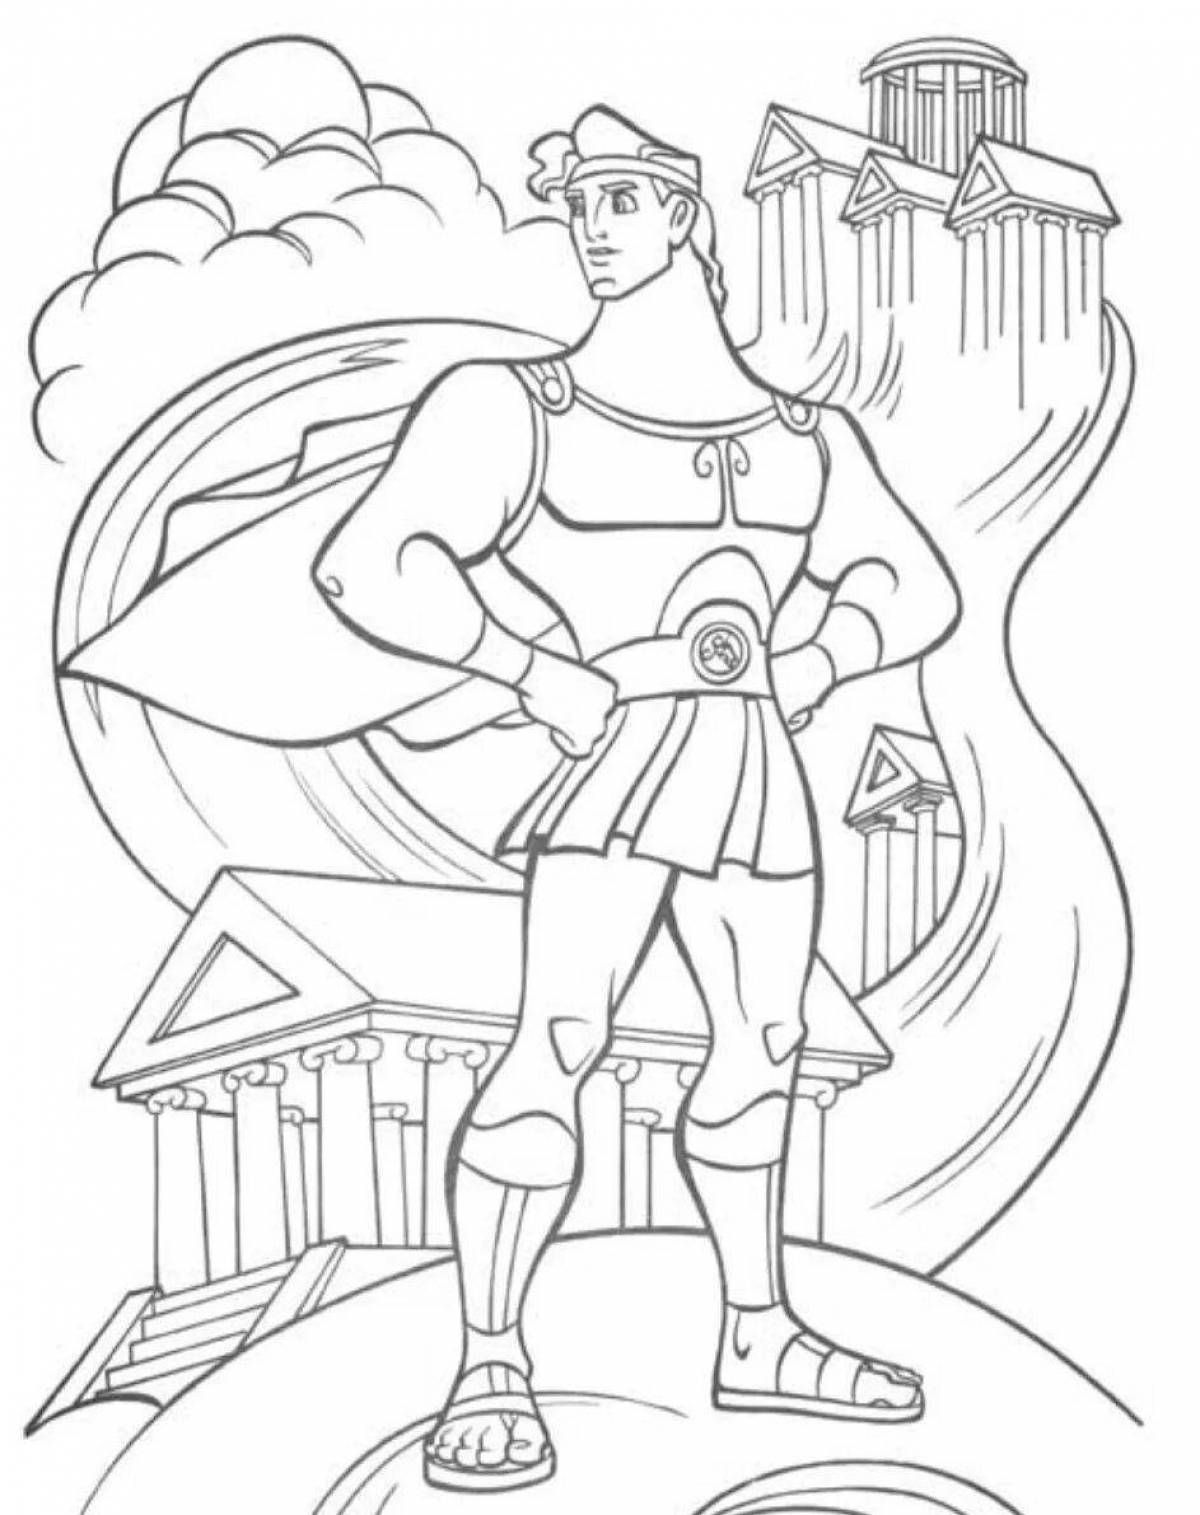 Intriguing myth coloring book